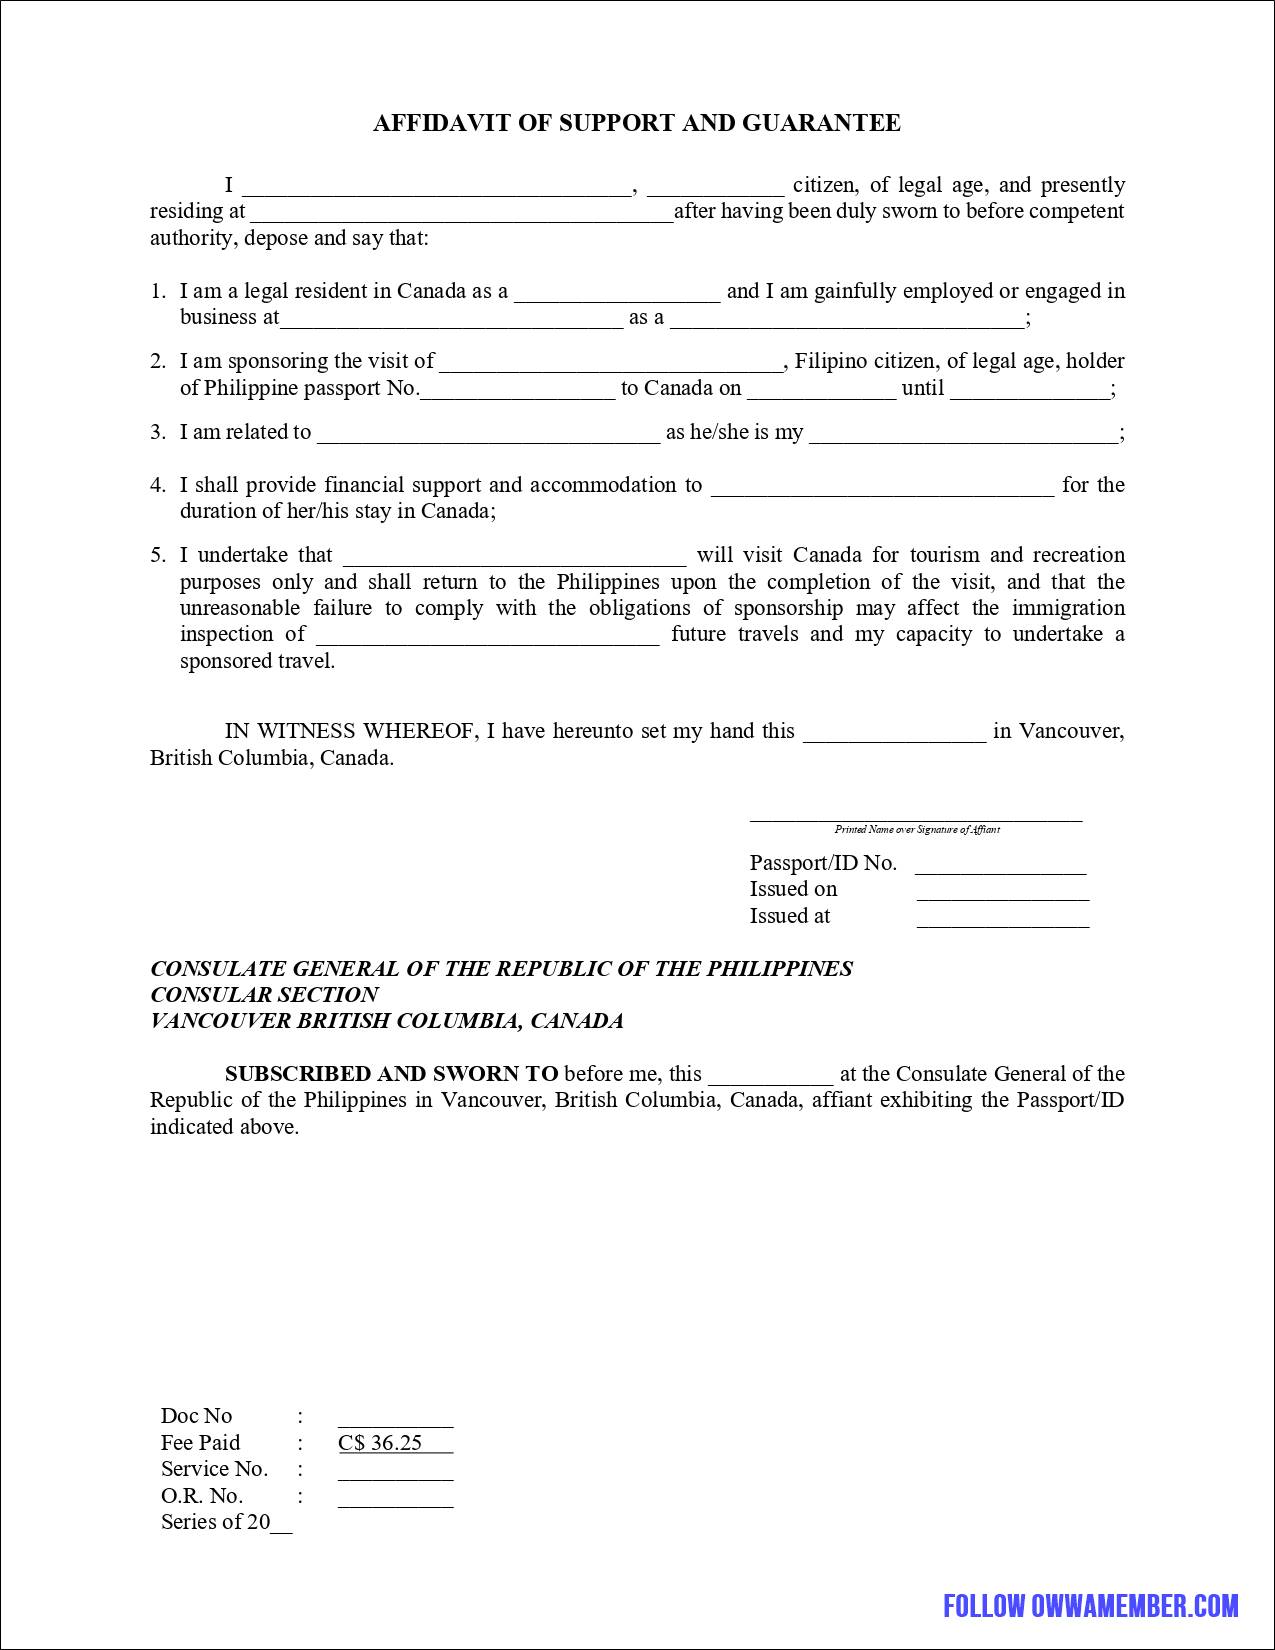 AFFIDAVIT-OF-SUPPORT-AND-GUARANTEE-Vancouver Canada